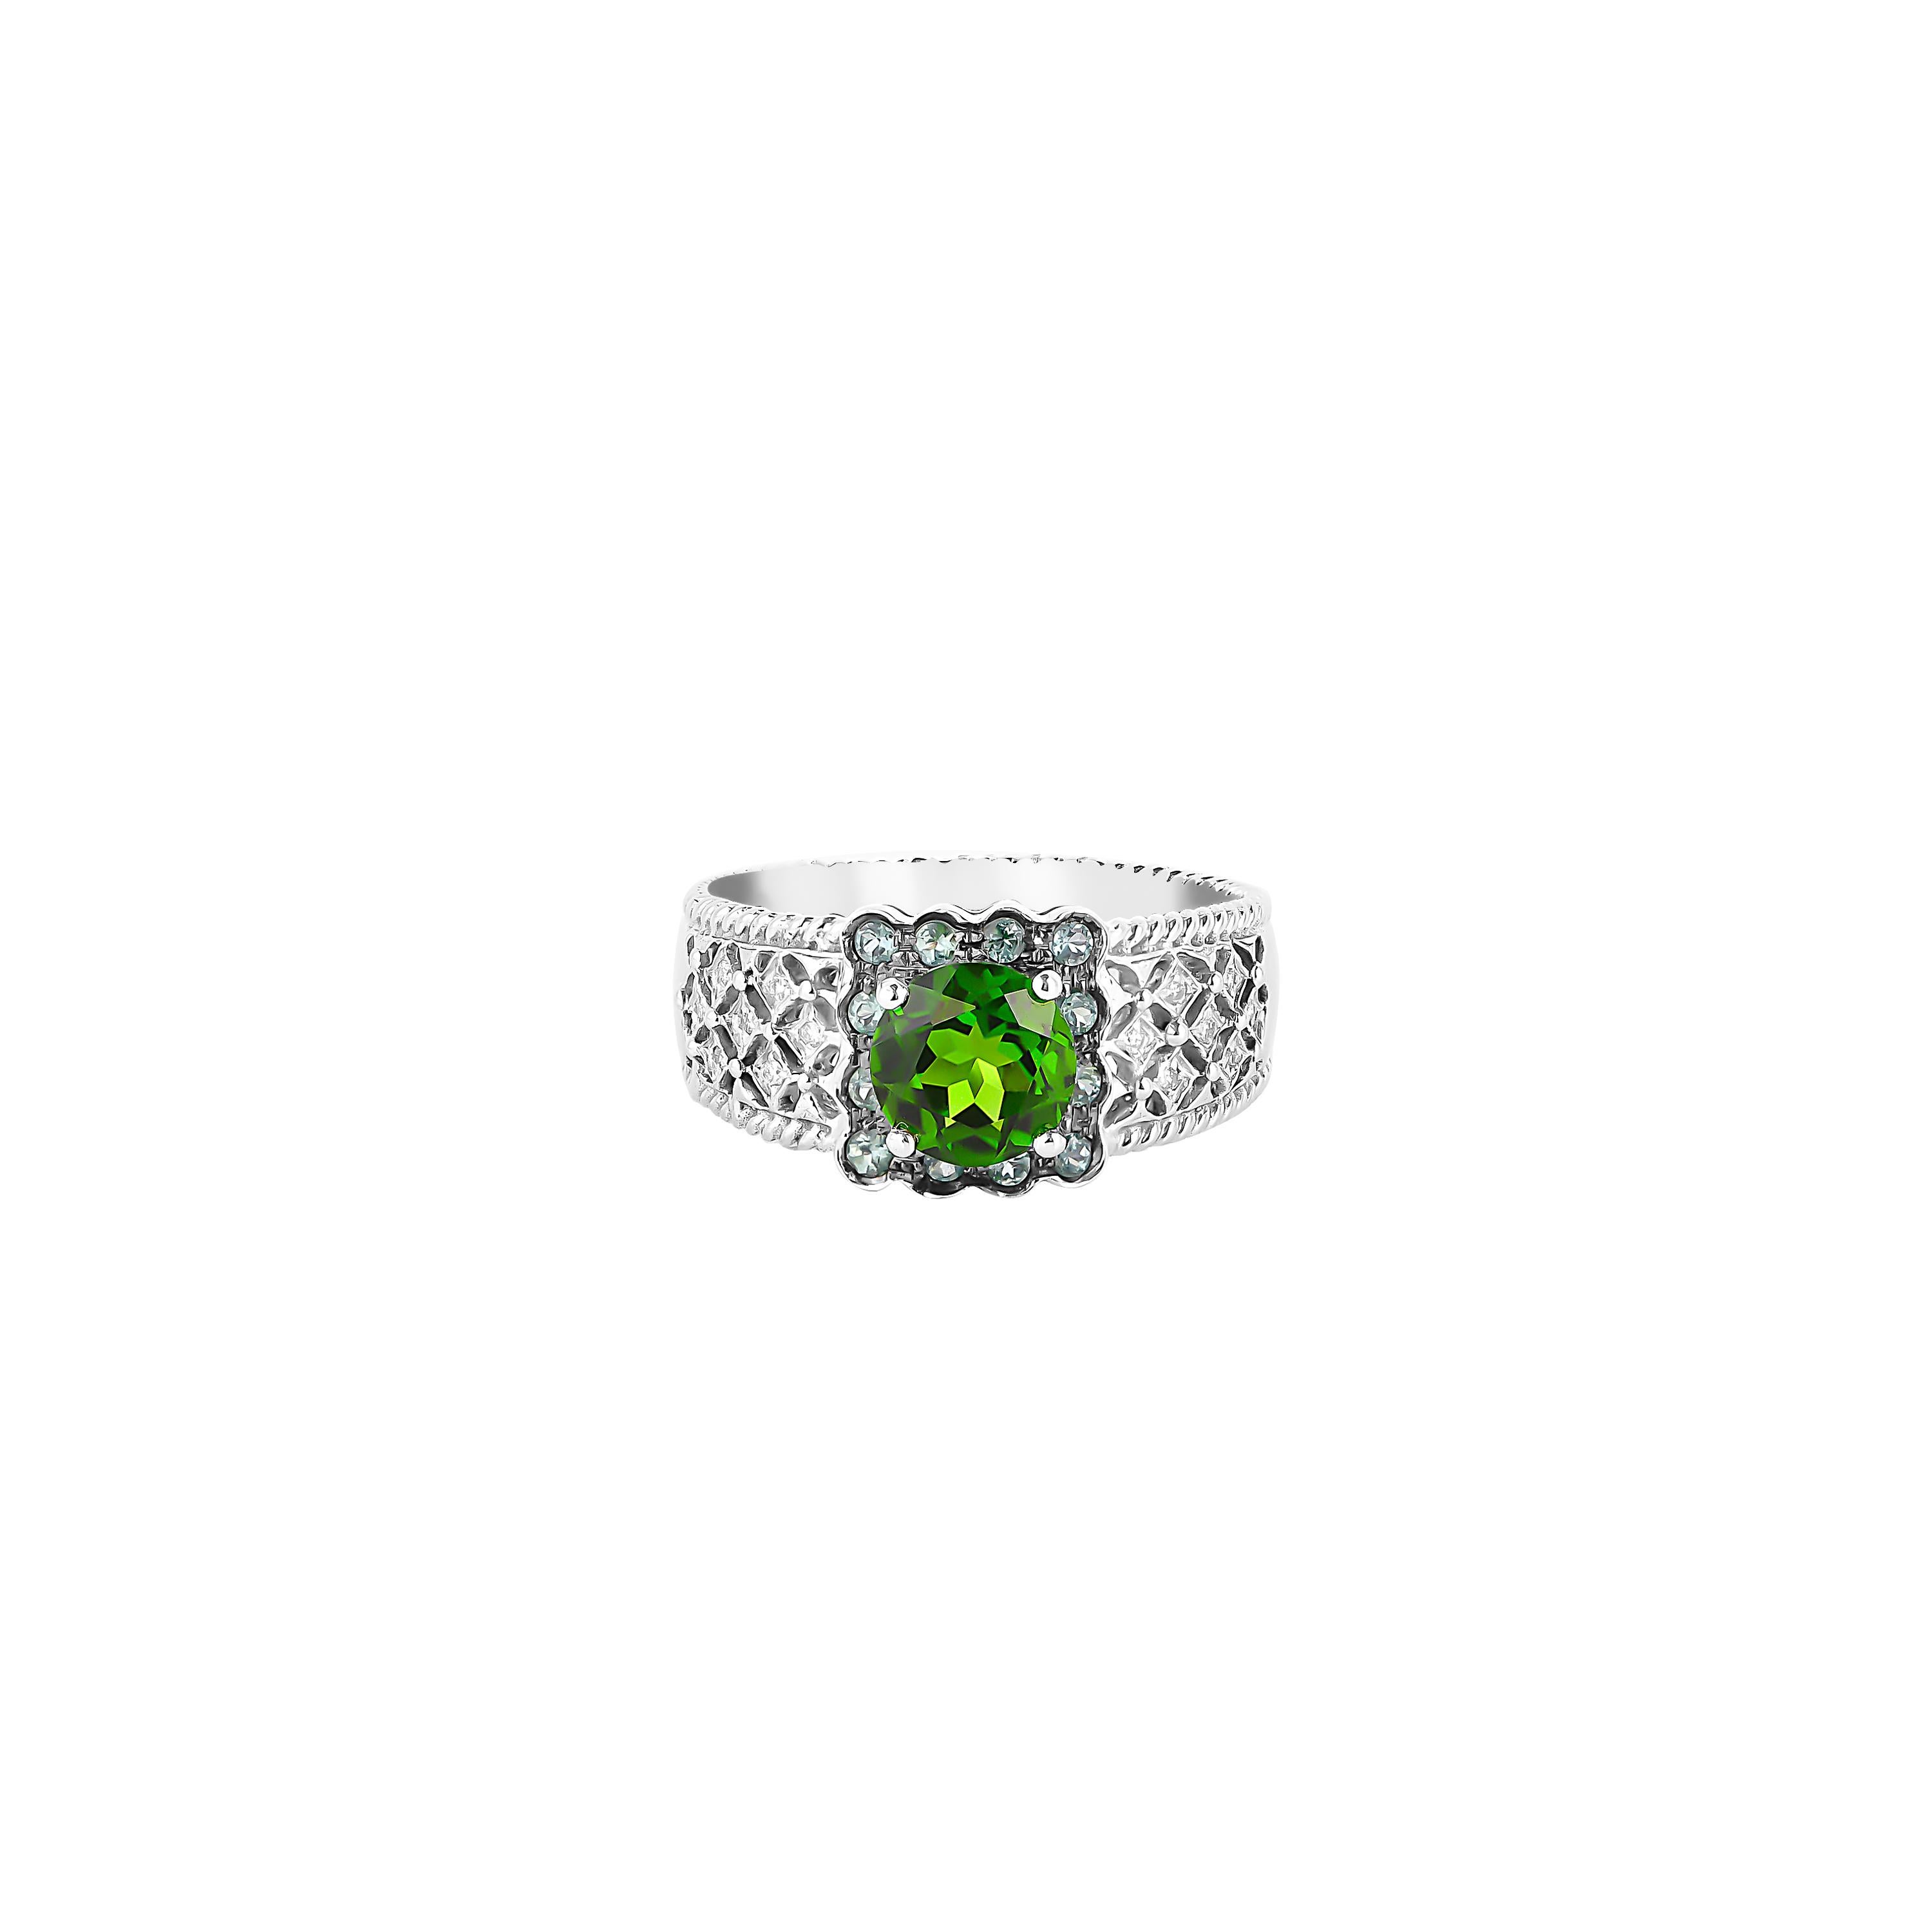 Contemporary 1.10 Carat Chrome Diopside Ring in 14 Karat White Gold For Sale